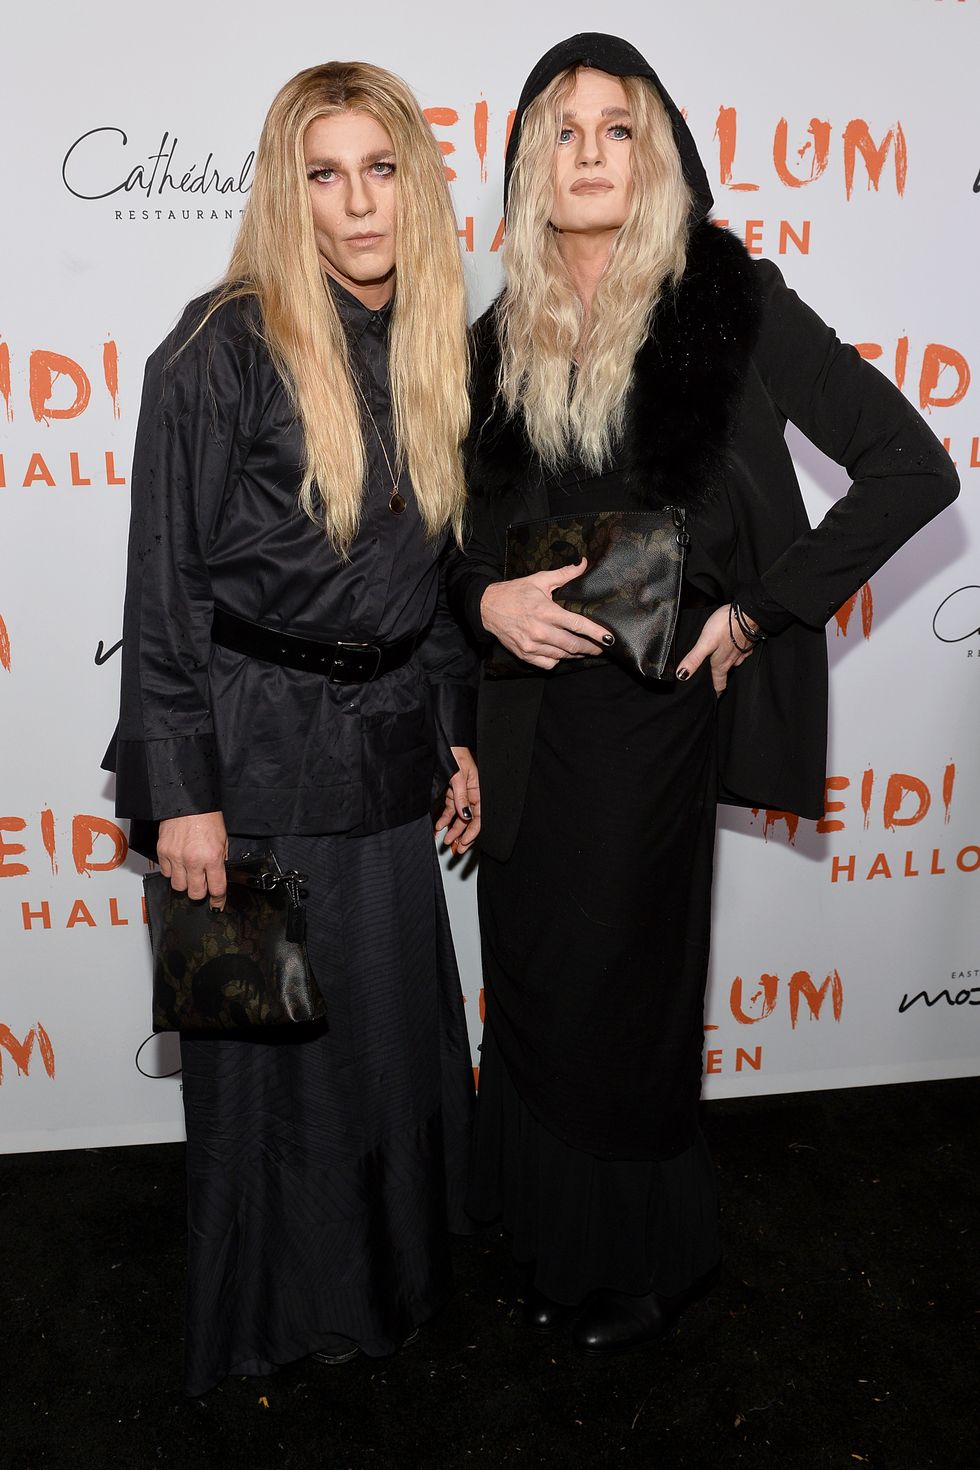 heidi klum 20th annual halloween party presented by amazon prime video and svedka vodka new york new york new york october 31 david burtka l and neil patrick harris attend heidi klums 20th annual halloween party presented by amazon prime video and svedka vodka at cathédrale new york on october 31, 2019 in new york city photo by noam galaigetty images for heidi klum